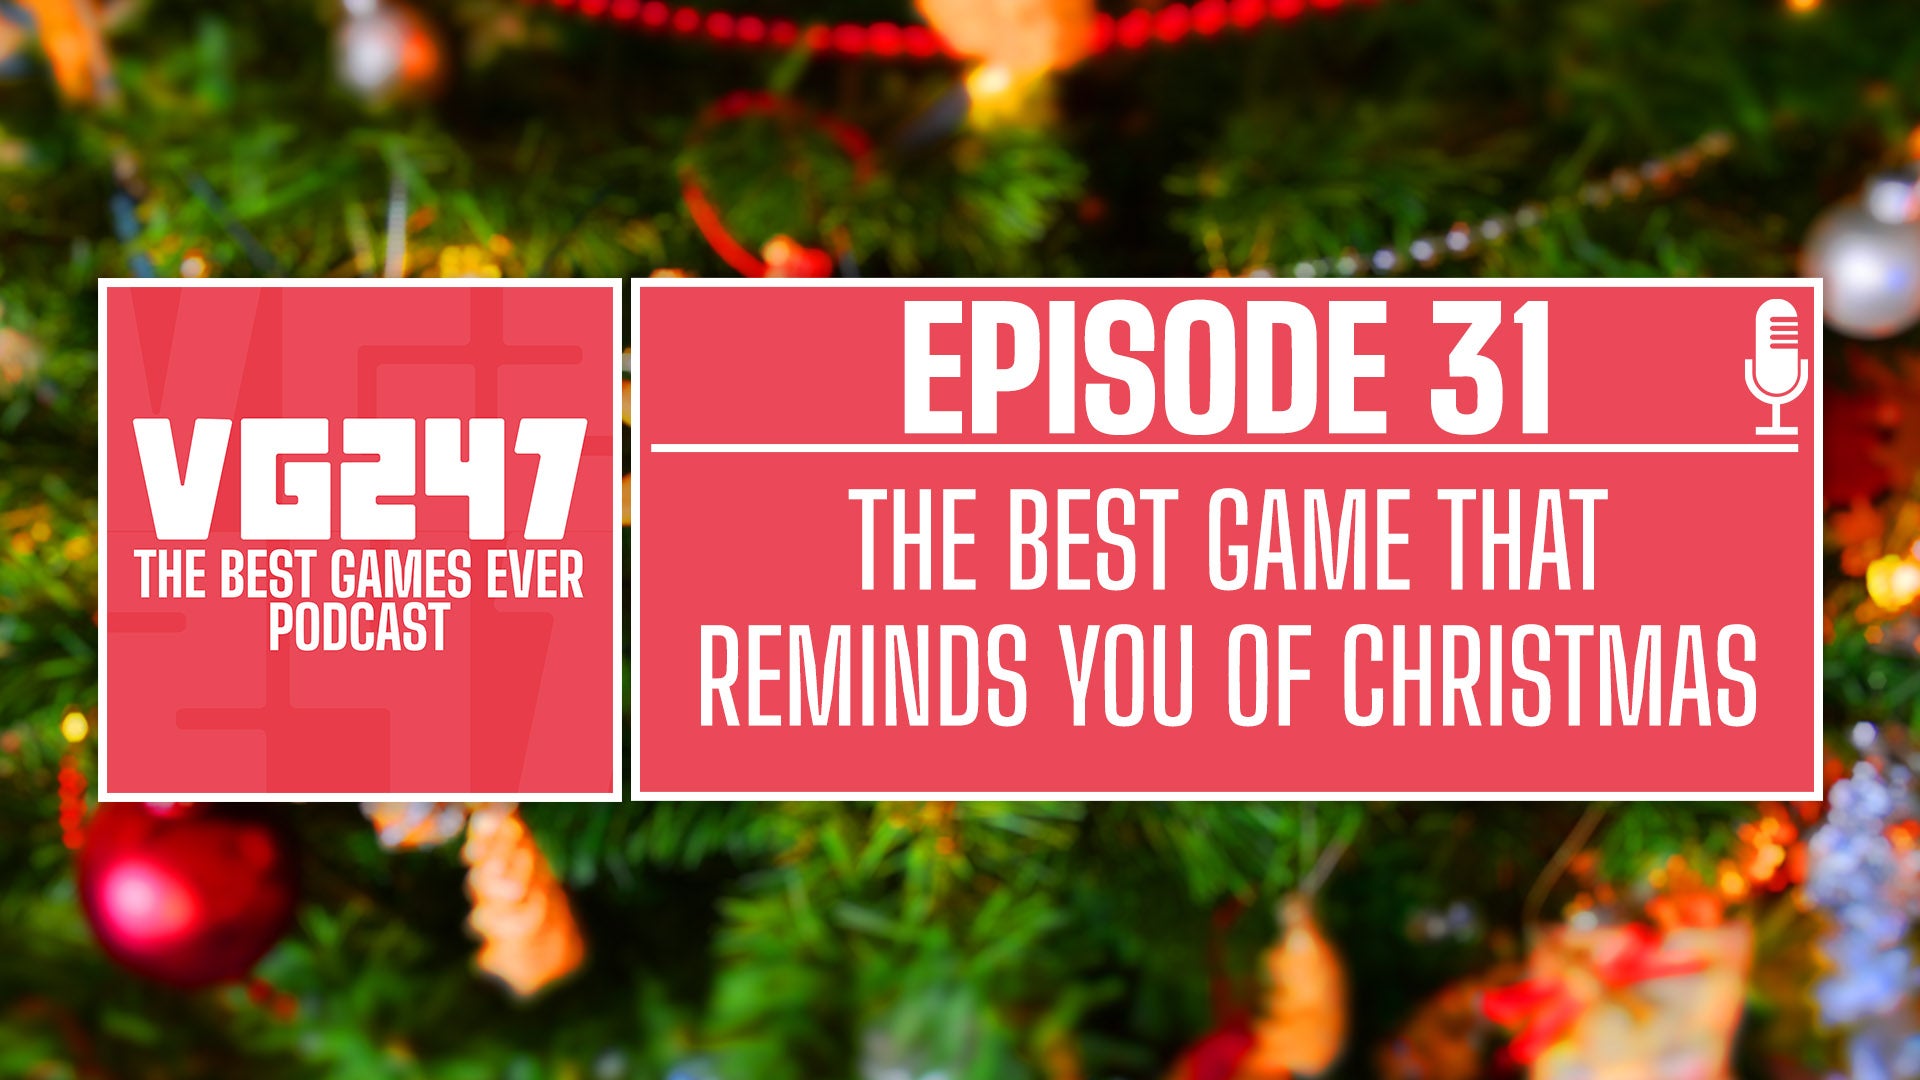 VG247’s The Best Games Ever Podcast – Ep.31: The best game that reminds you of Christmas